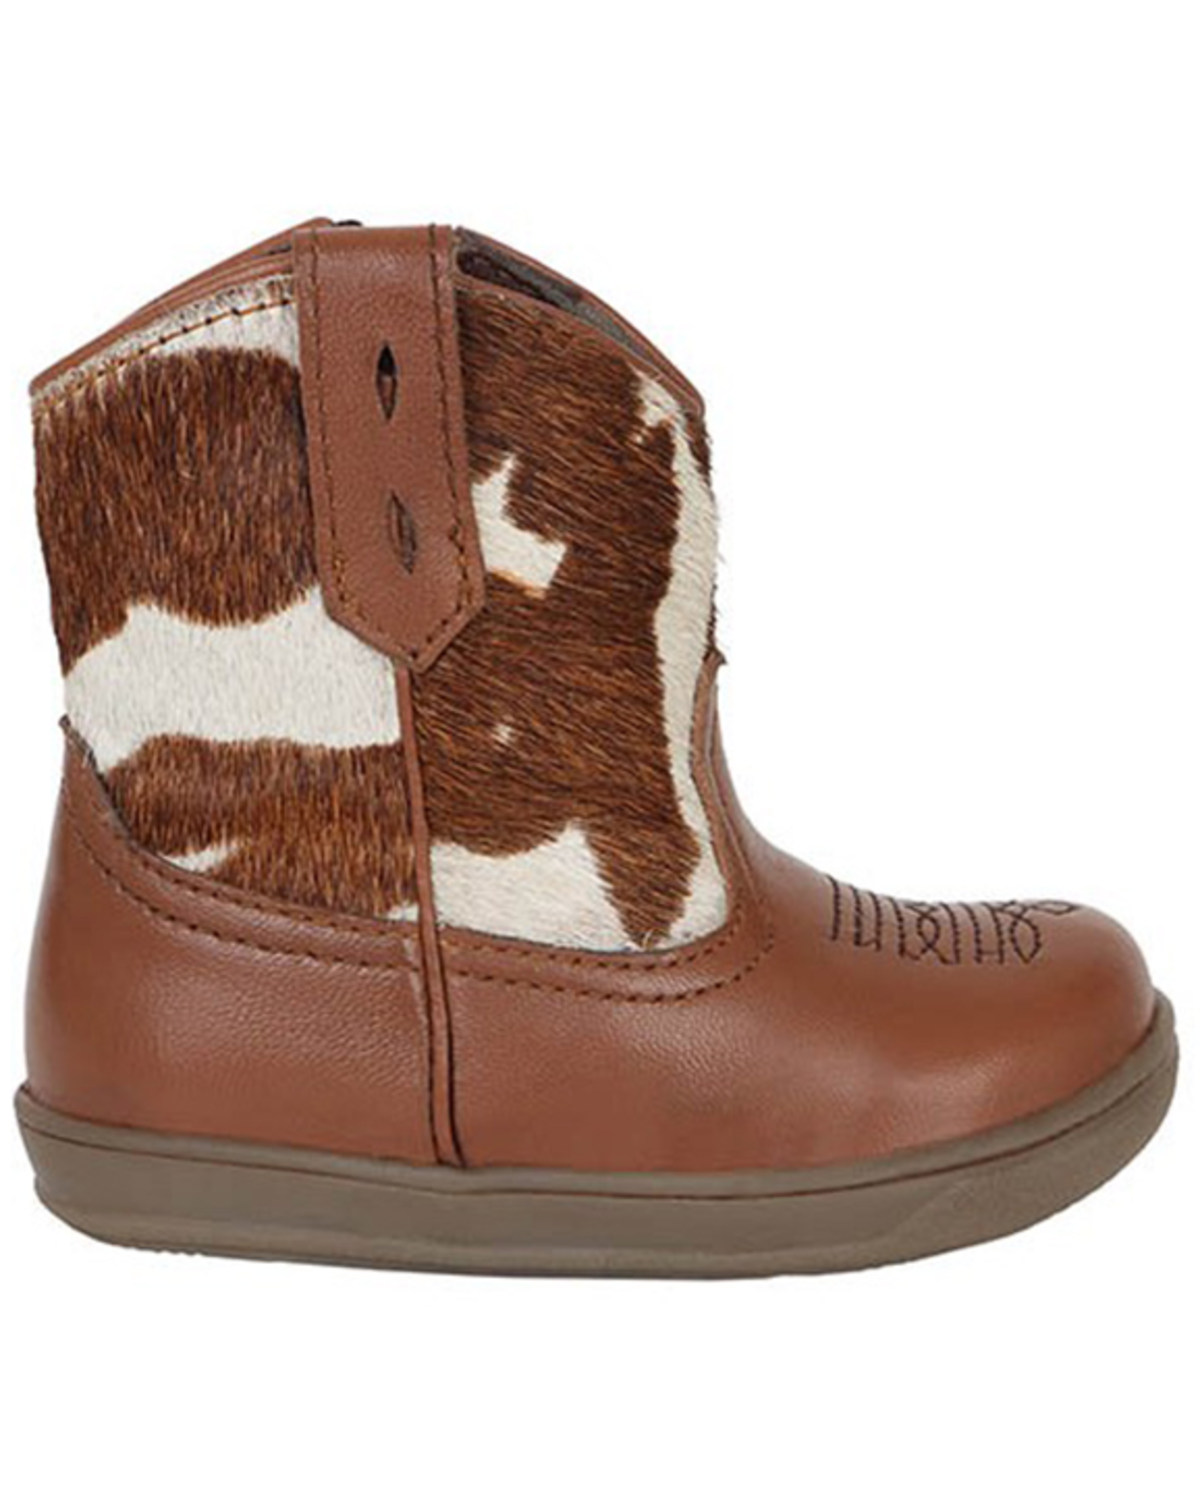 Roper Infant Boys Cora Cowbabies Western Boots - Round Toe